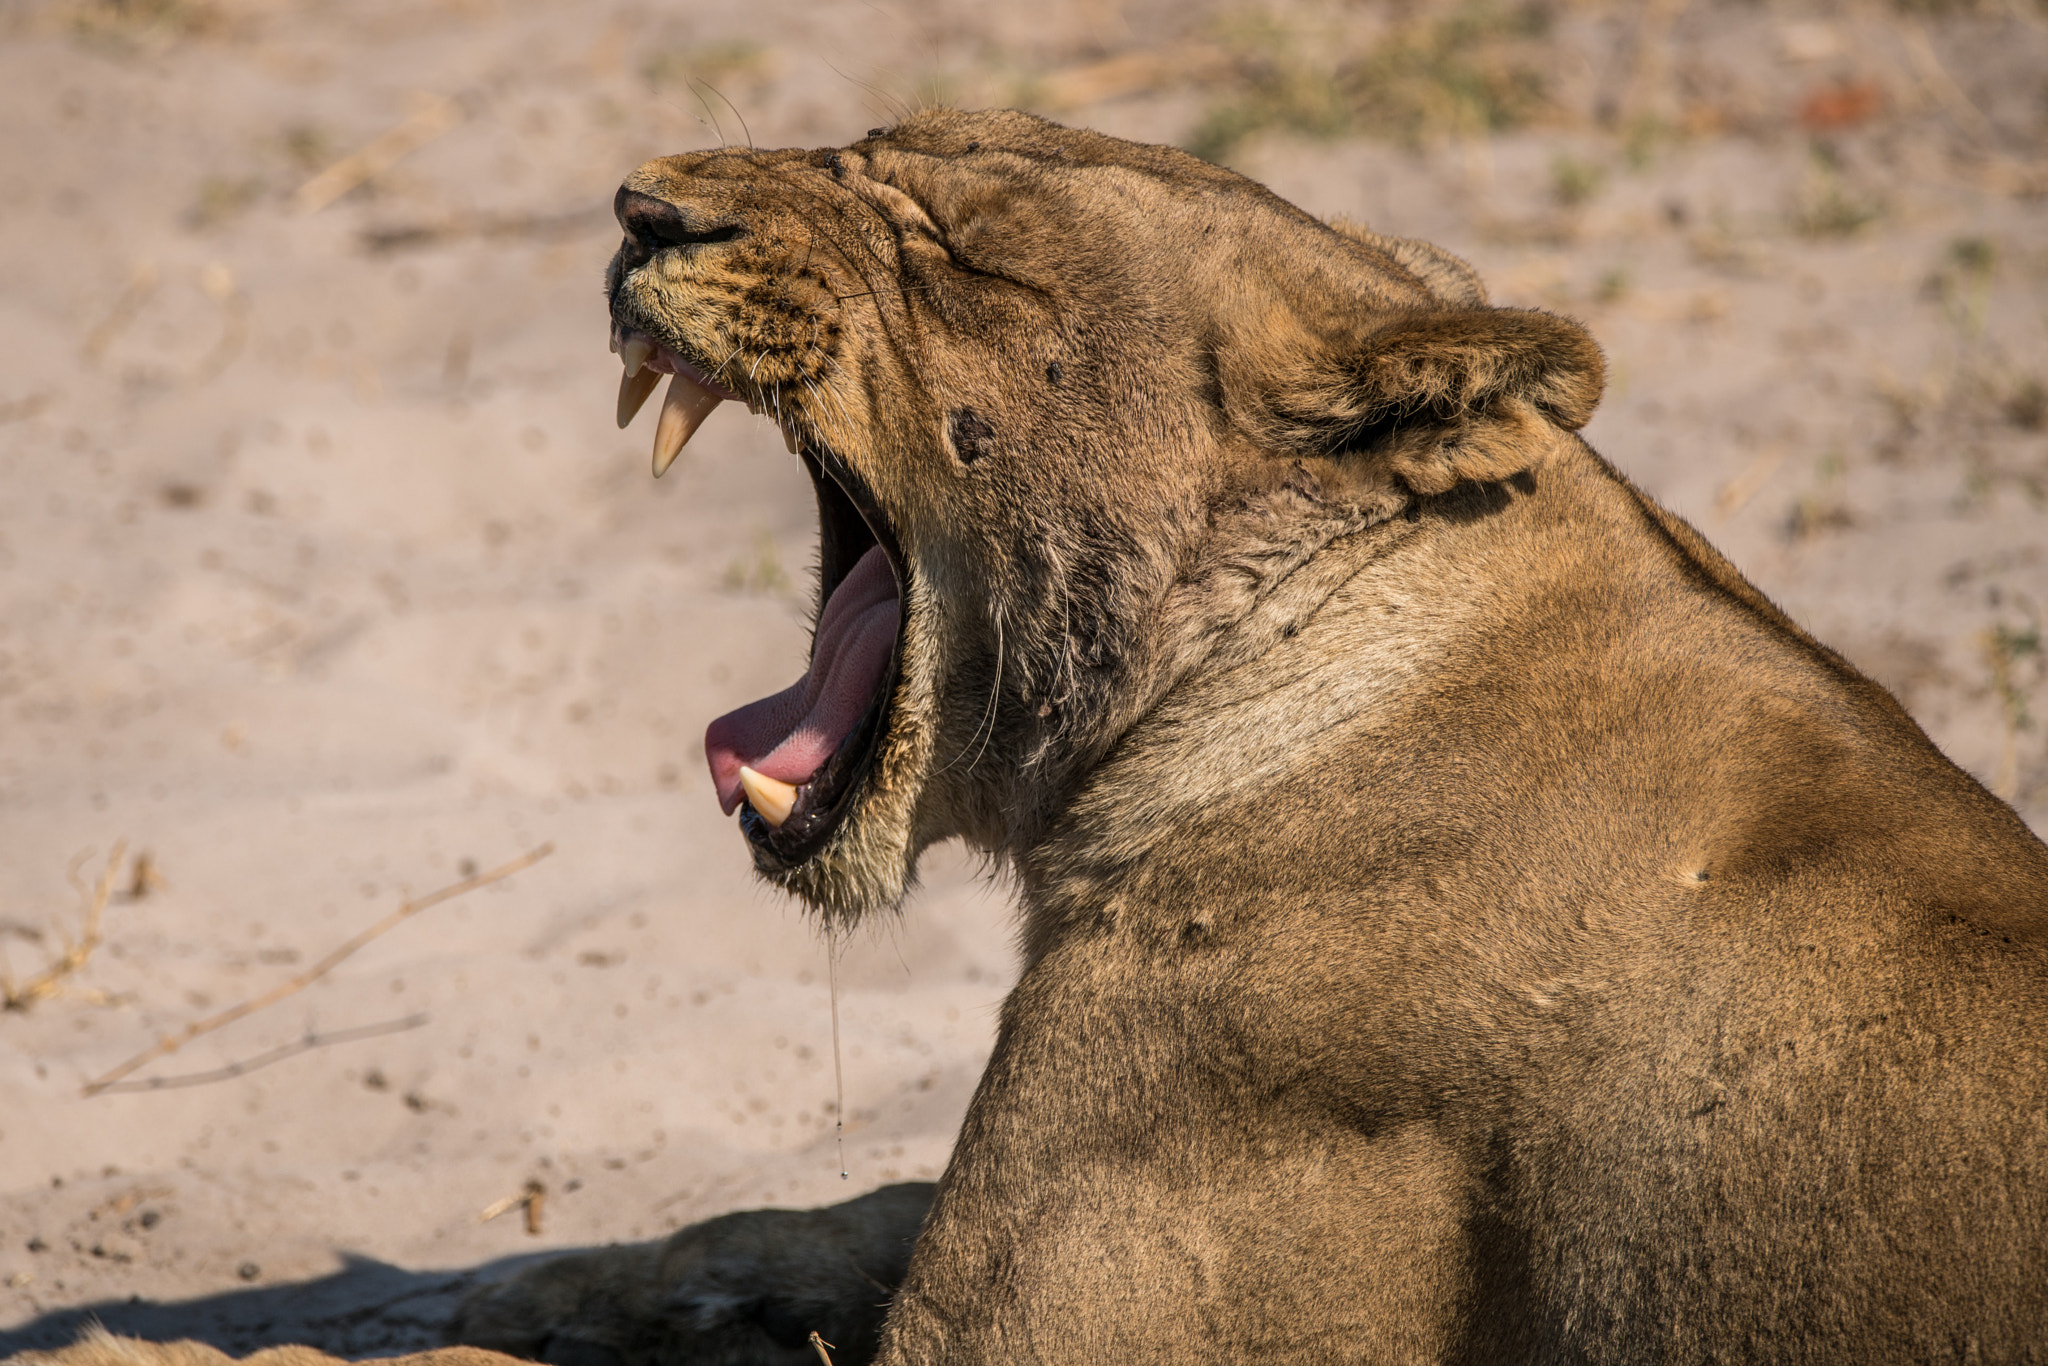 Sony a7R II sample photo. The endurance of a lioness photography